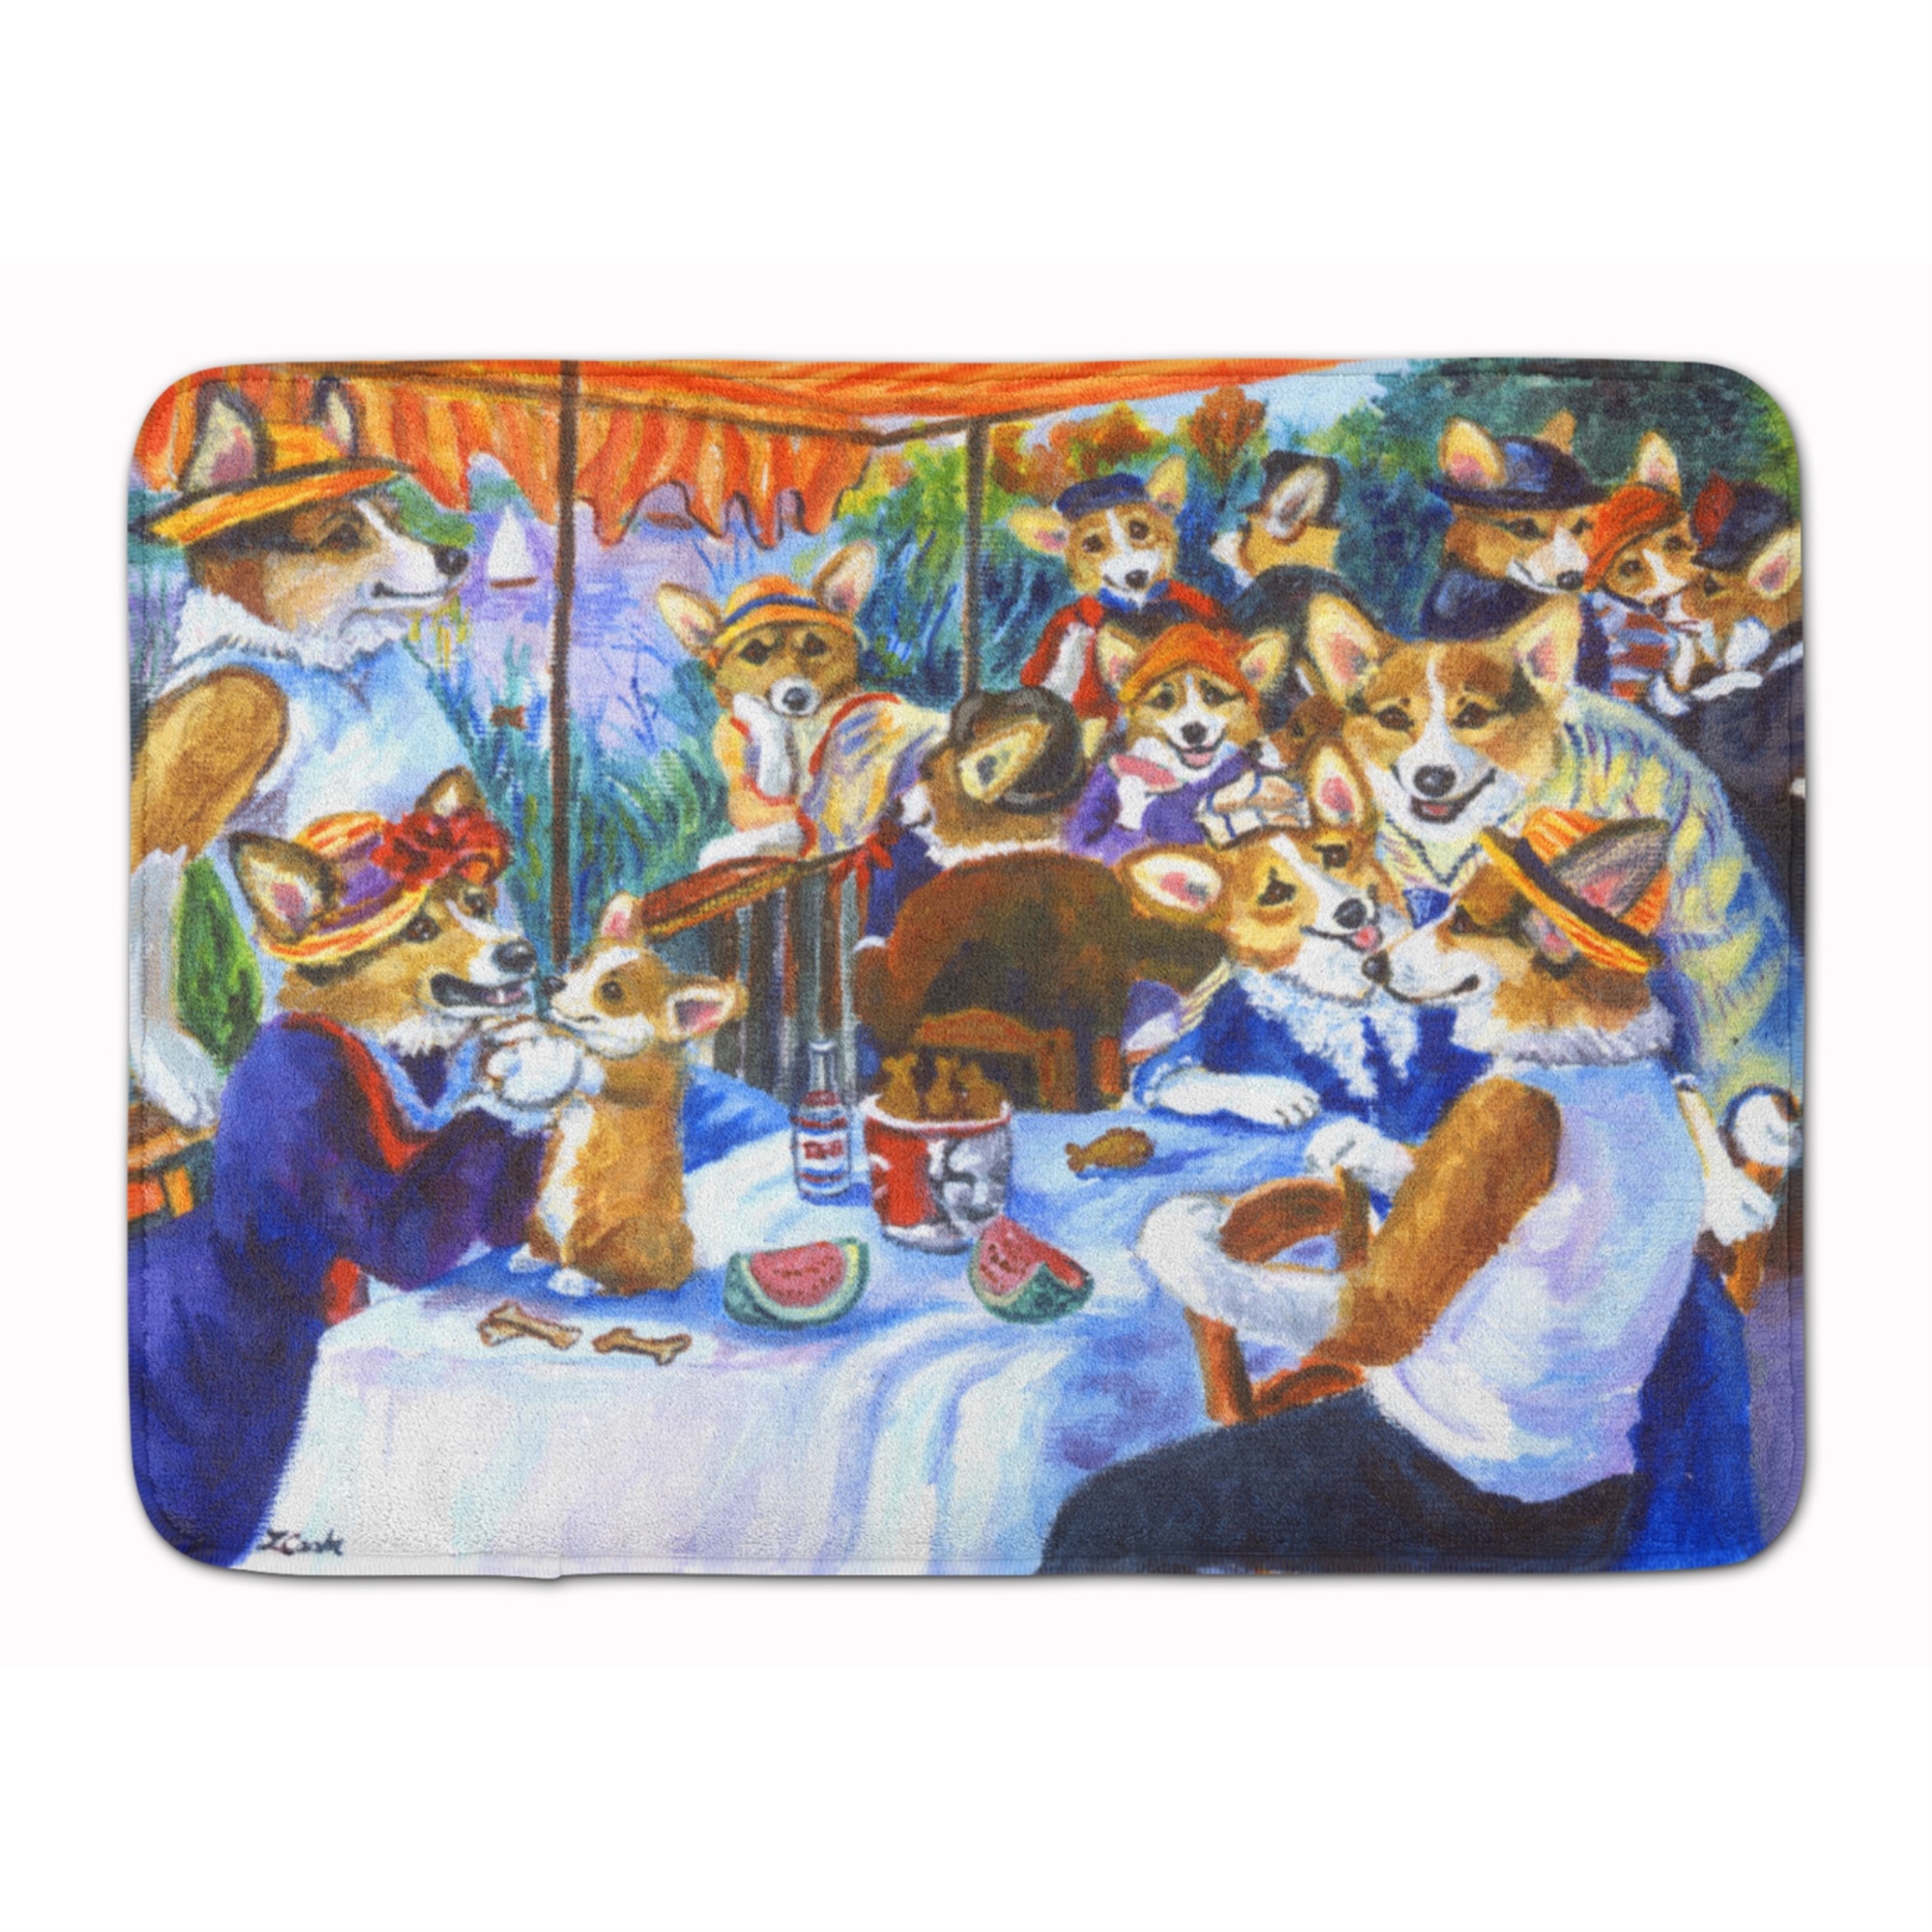 Caroline's Treasures "Caroline's Treasures Corgi Boating Party Floor Mat, 19"" x 27"", Multicolor"